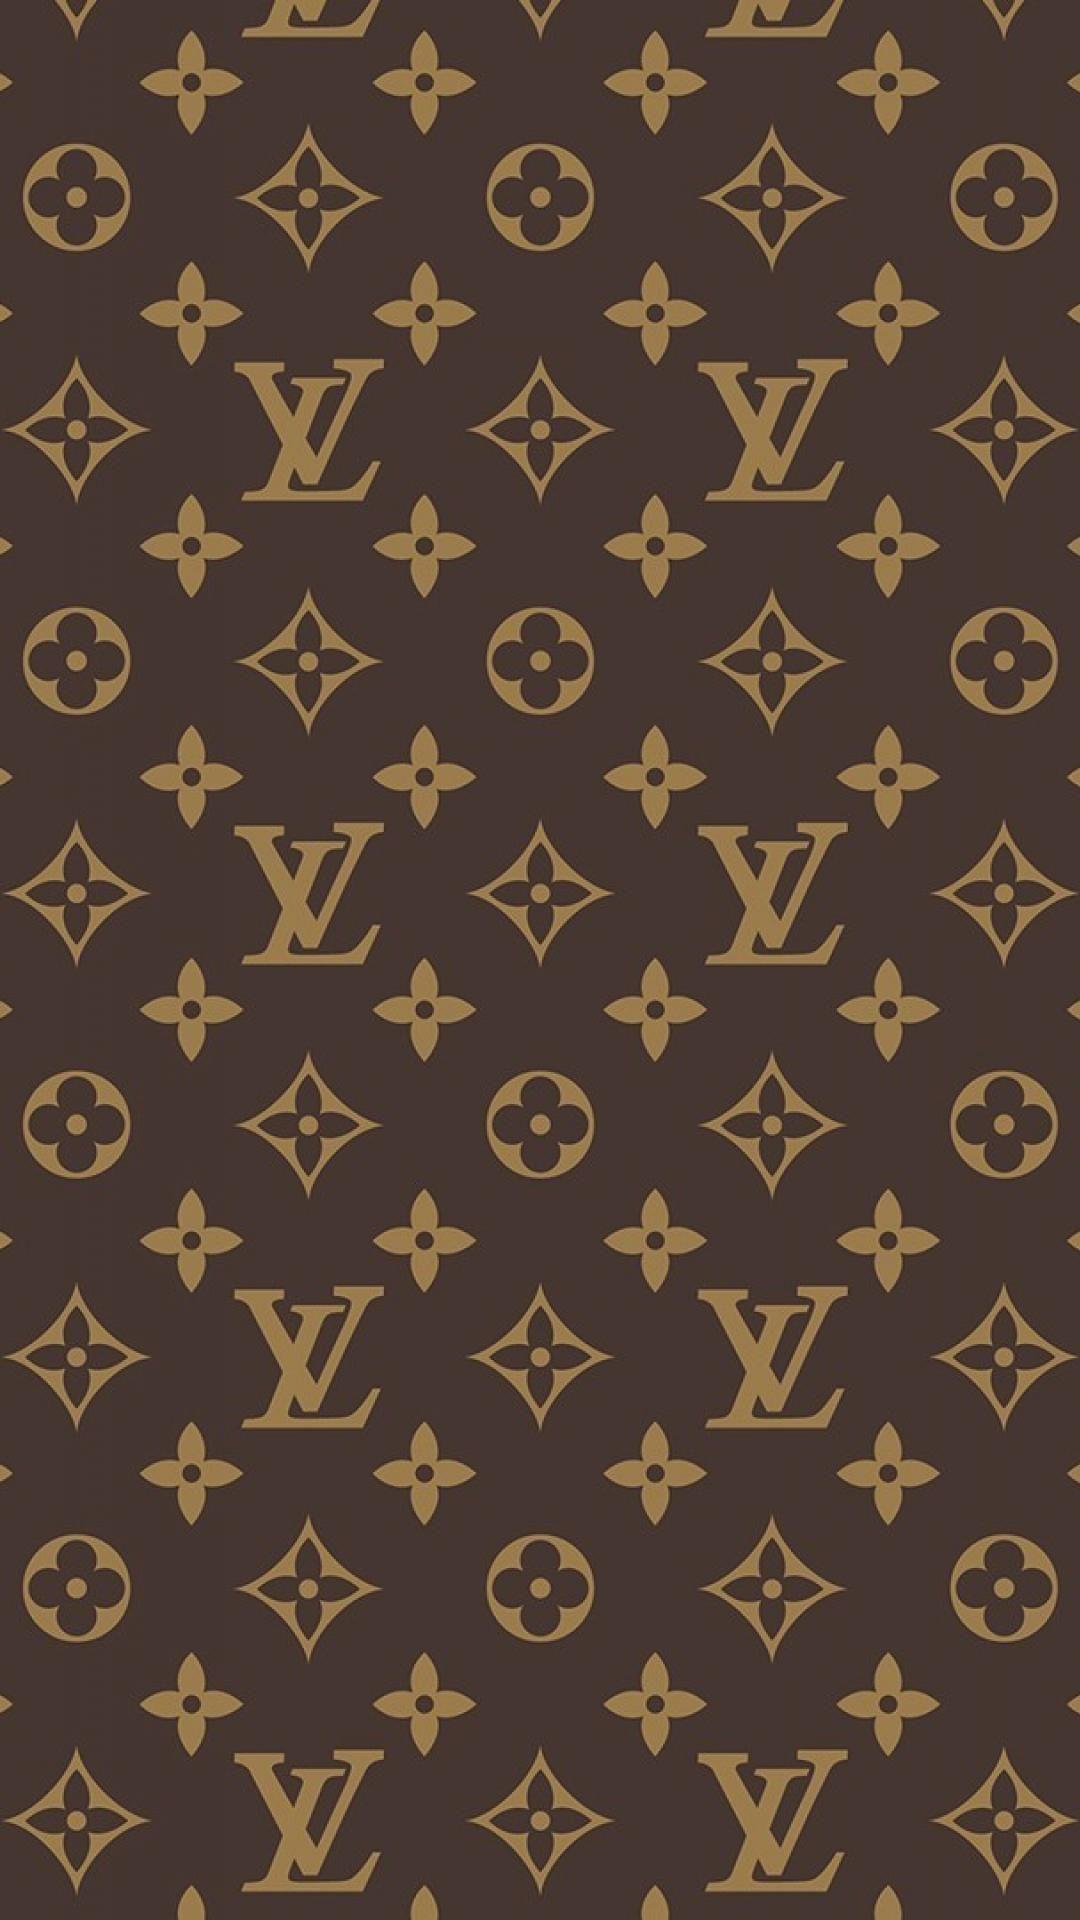 Lv Backgrounds